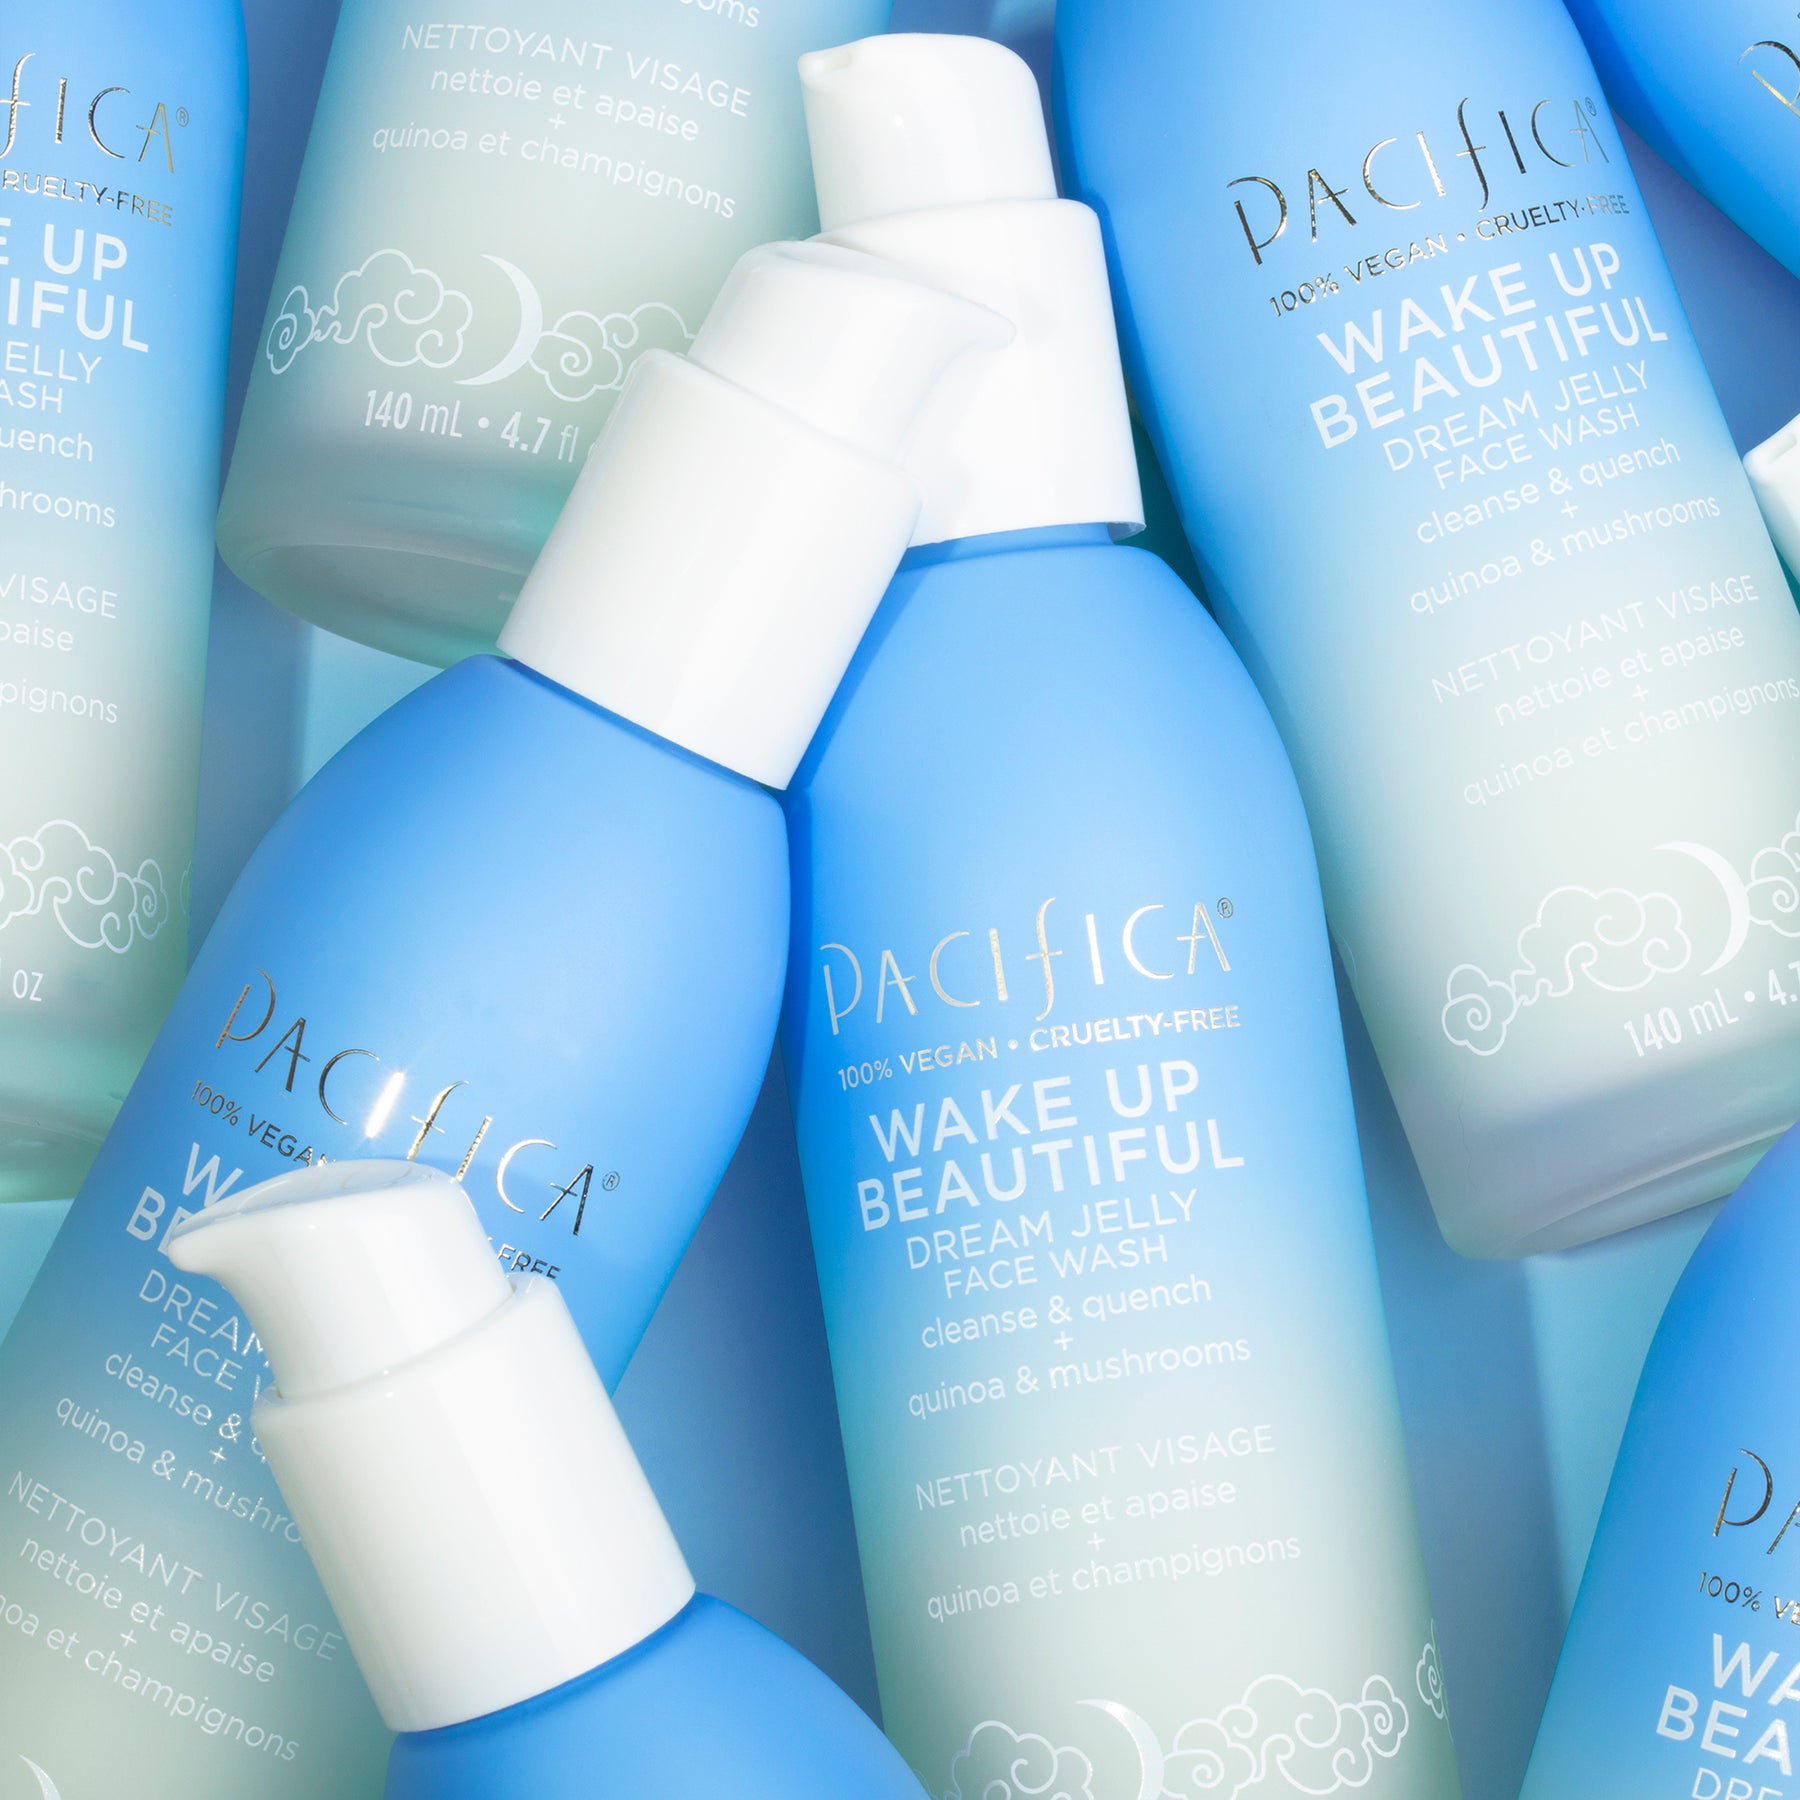 Wake Up Beautiful Dream Jelly Face Wash - Skin Care - Pacifica Beauty